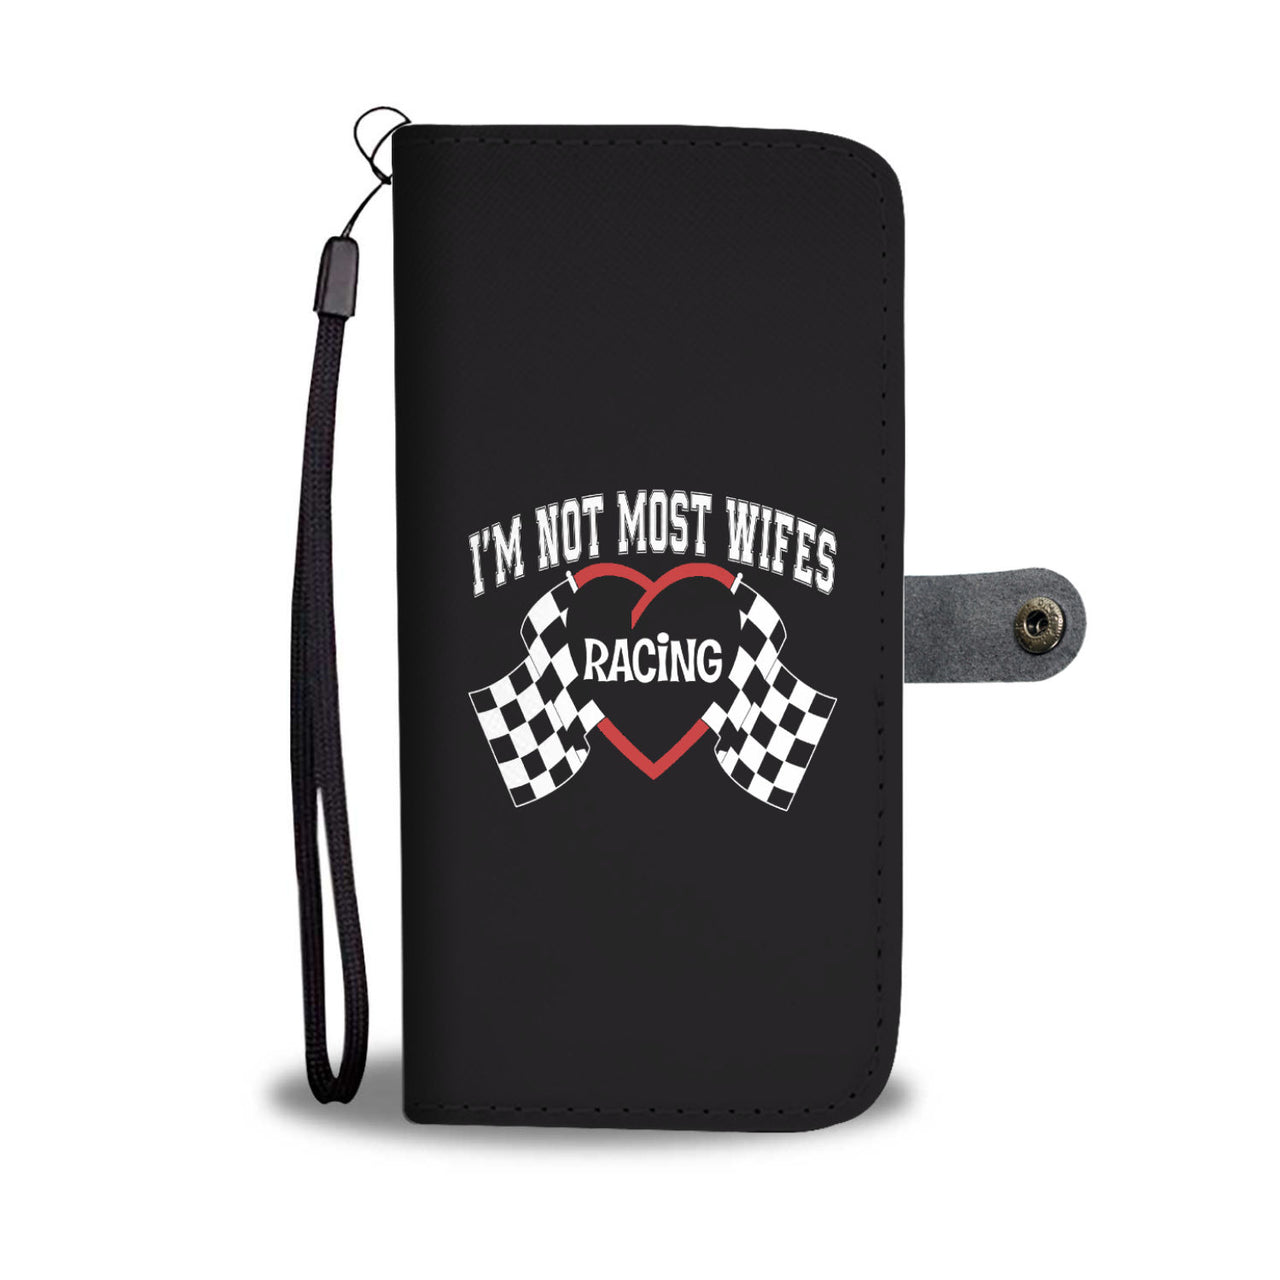 I'm Not Most Wifes Racing Wallet Case